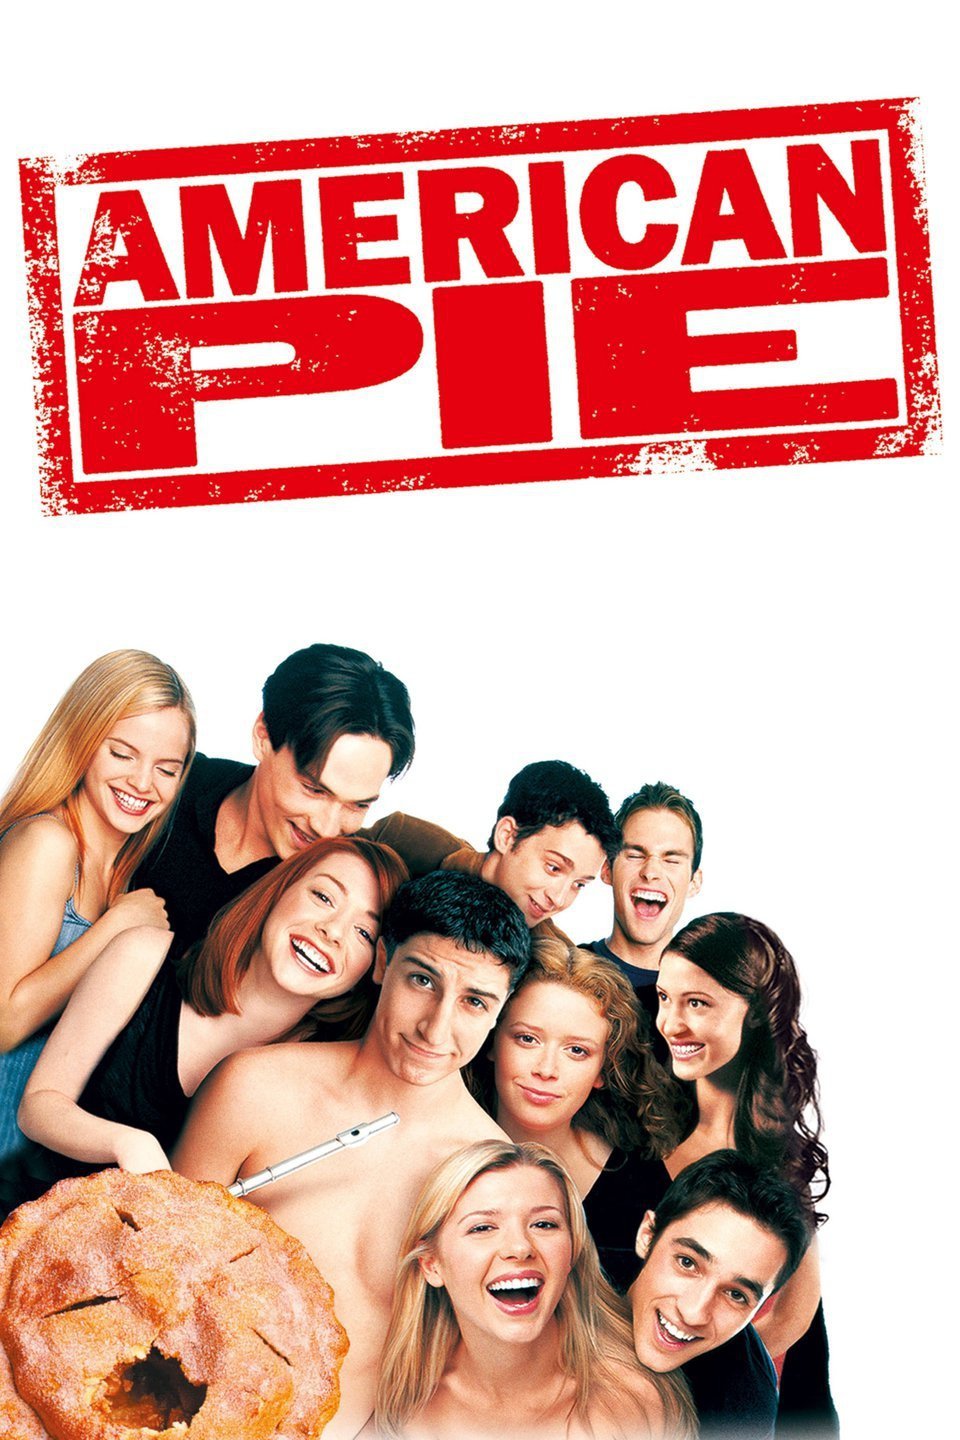 Watch American Pie (1999) Online for Free